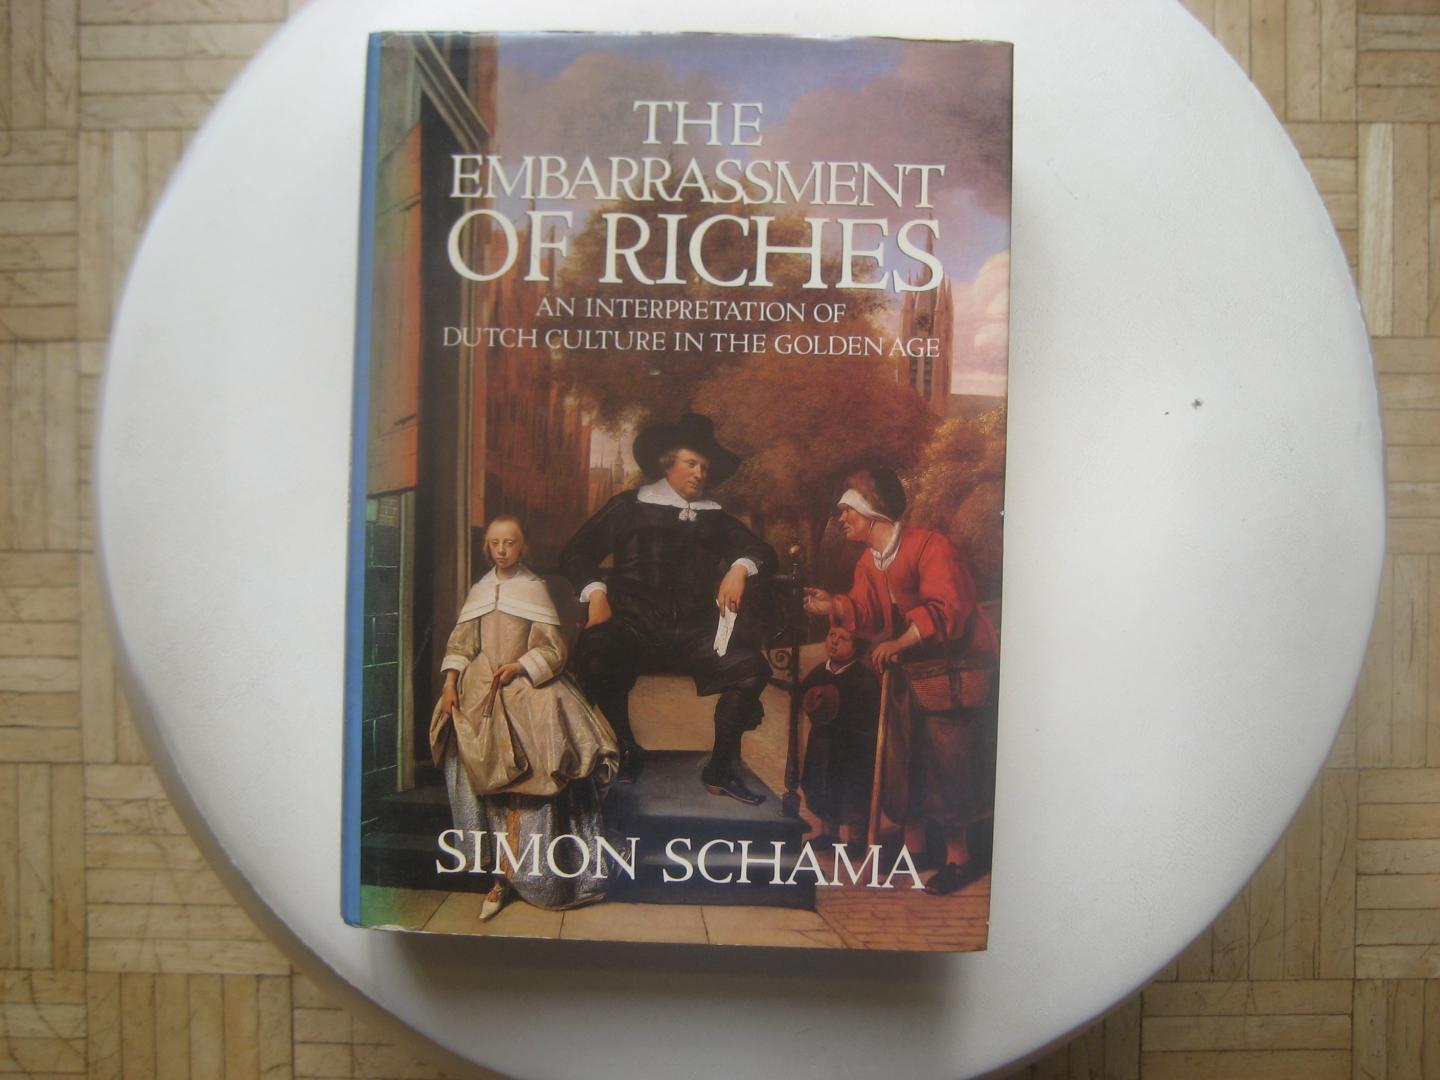 Simon Schama - The Embarrassment of Riches / Dutch culture in the Golden Age